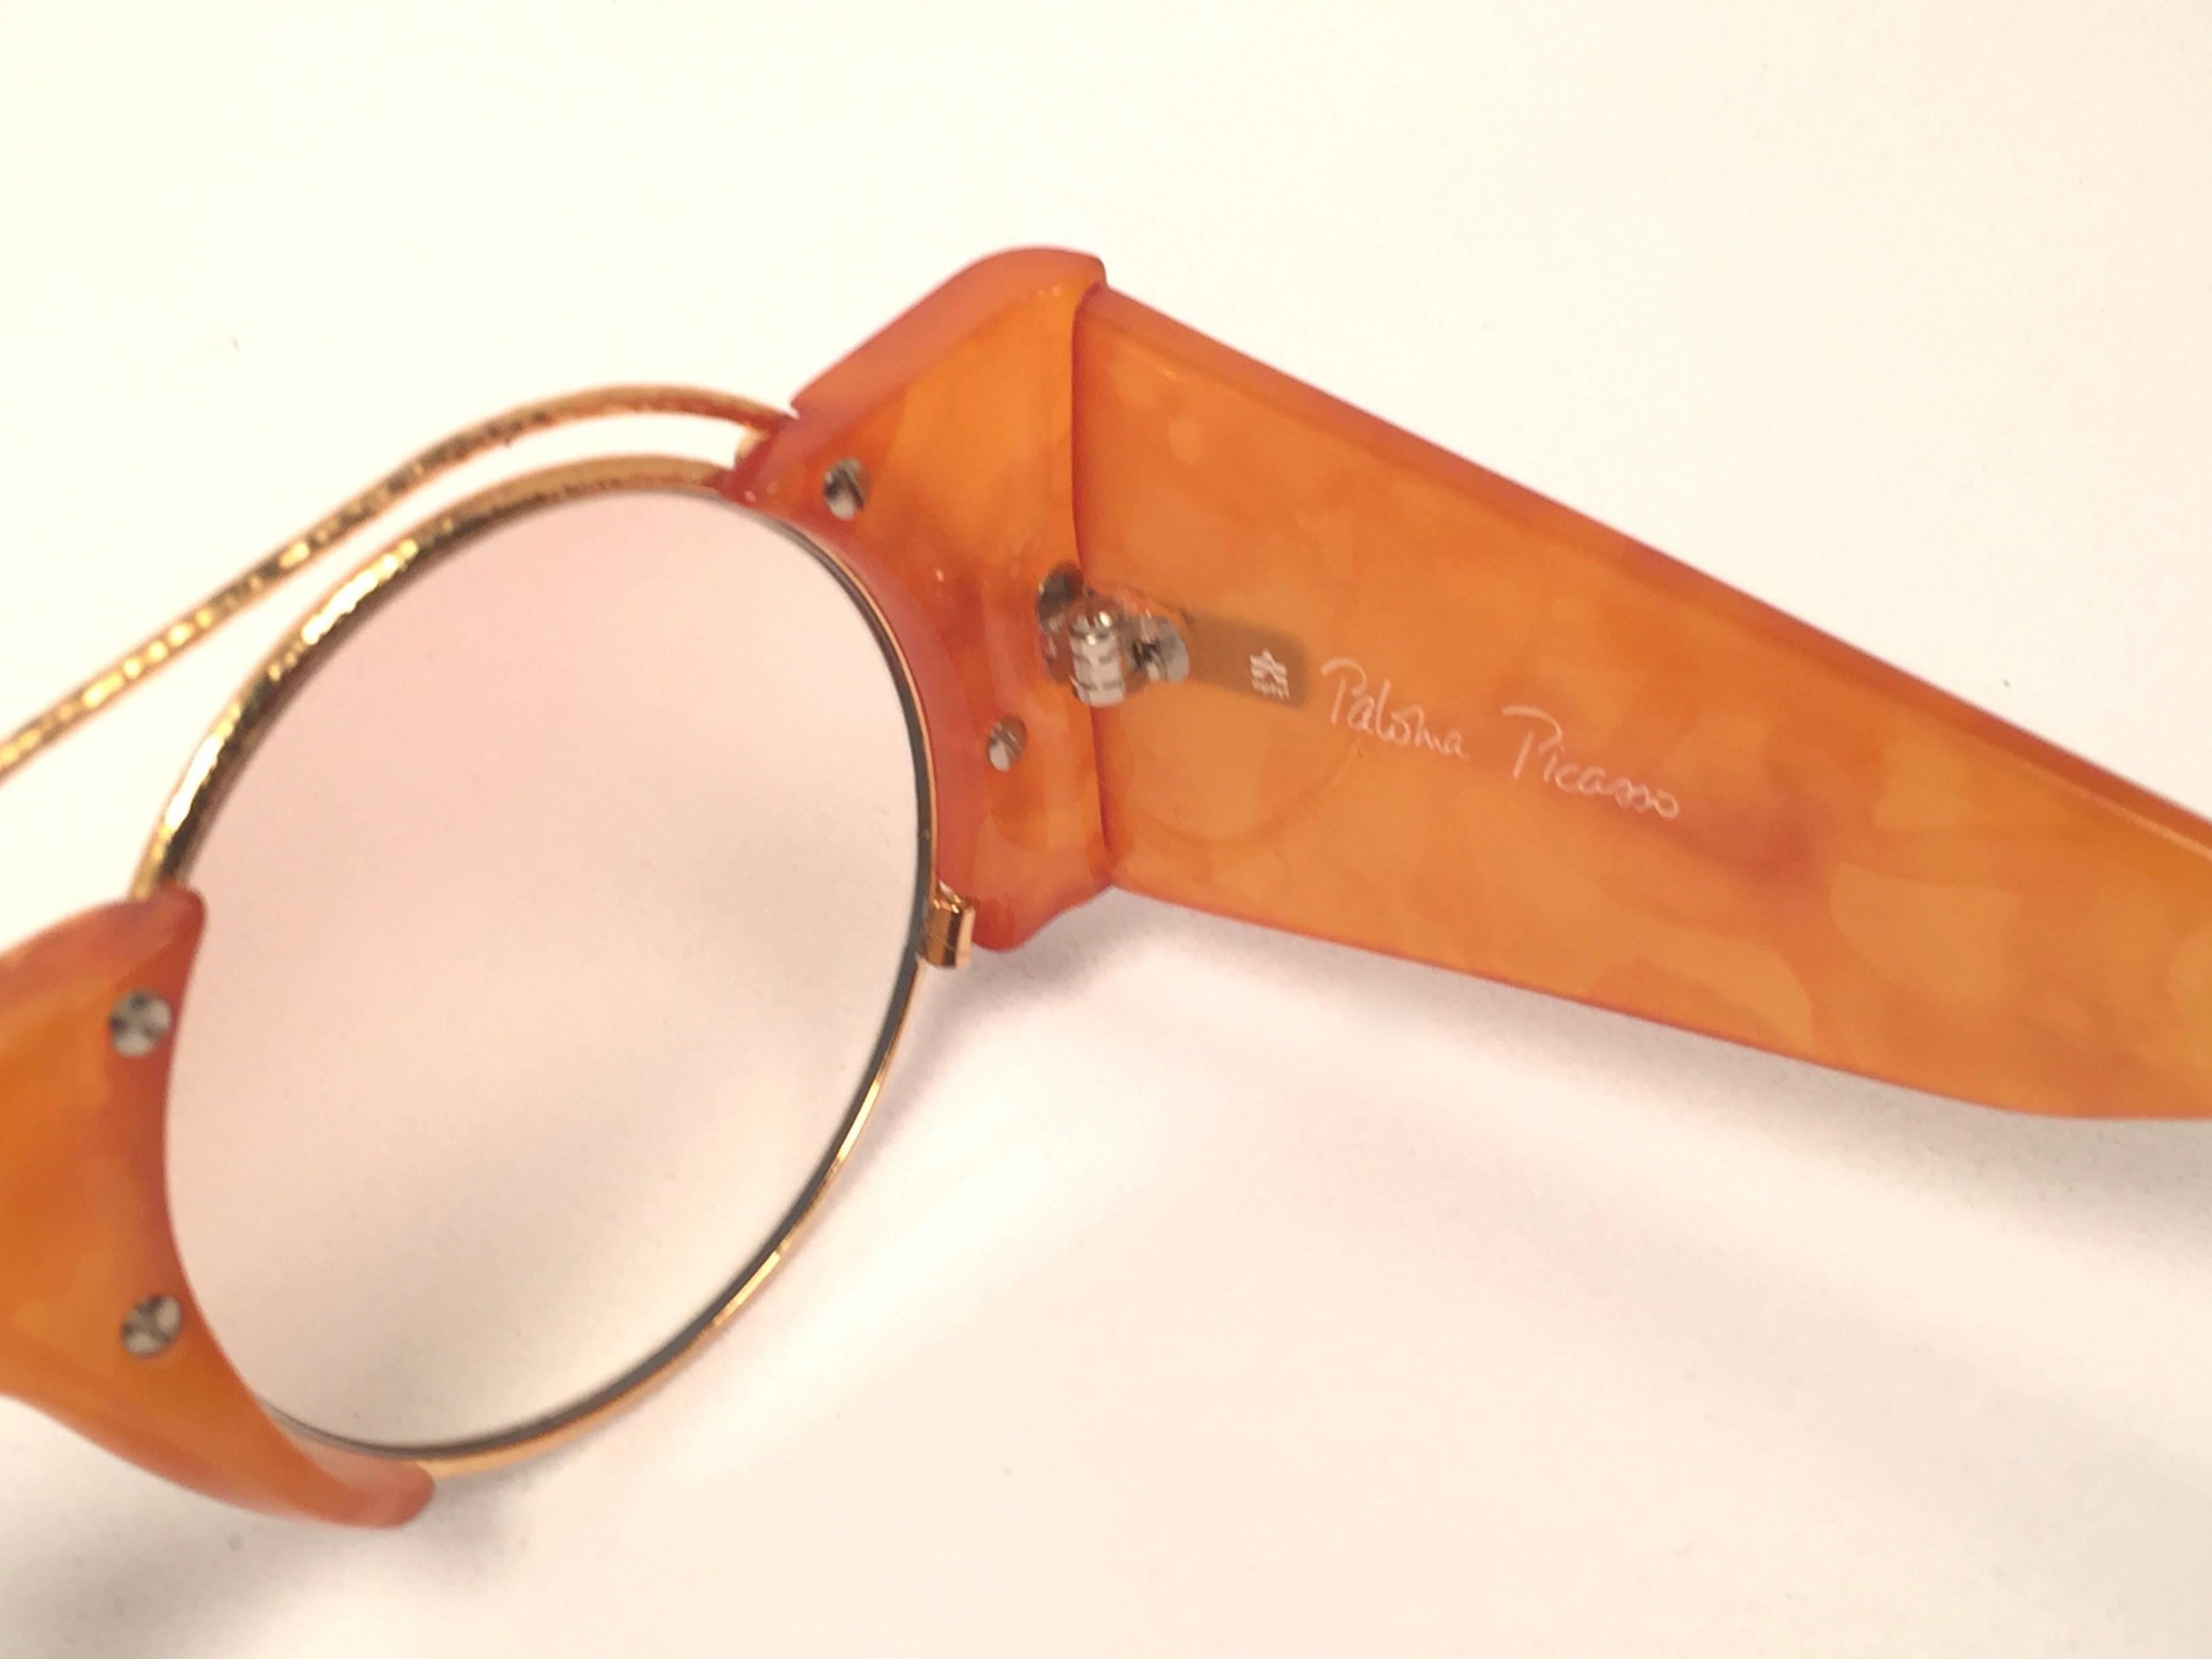 Paloma Picasso Vintage Oval Gold 3729 Lady Gaga Sunglasses Made in Germany 1980 In Excellent Condition For Sale In Baleares, Baleares